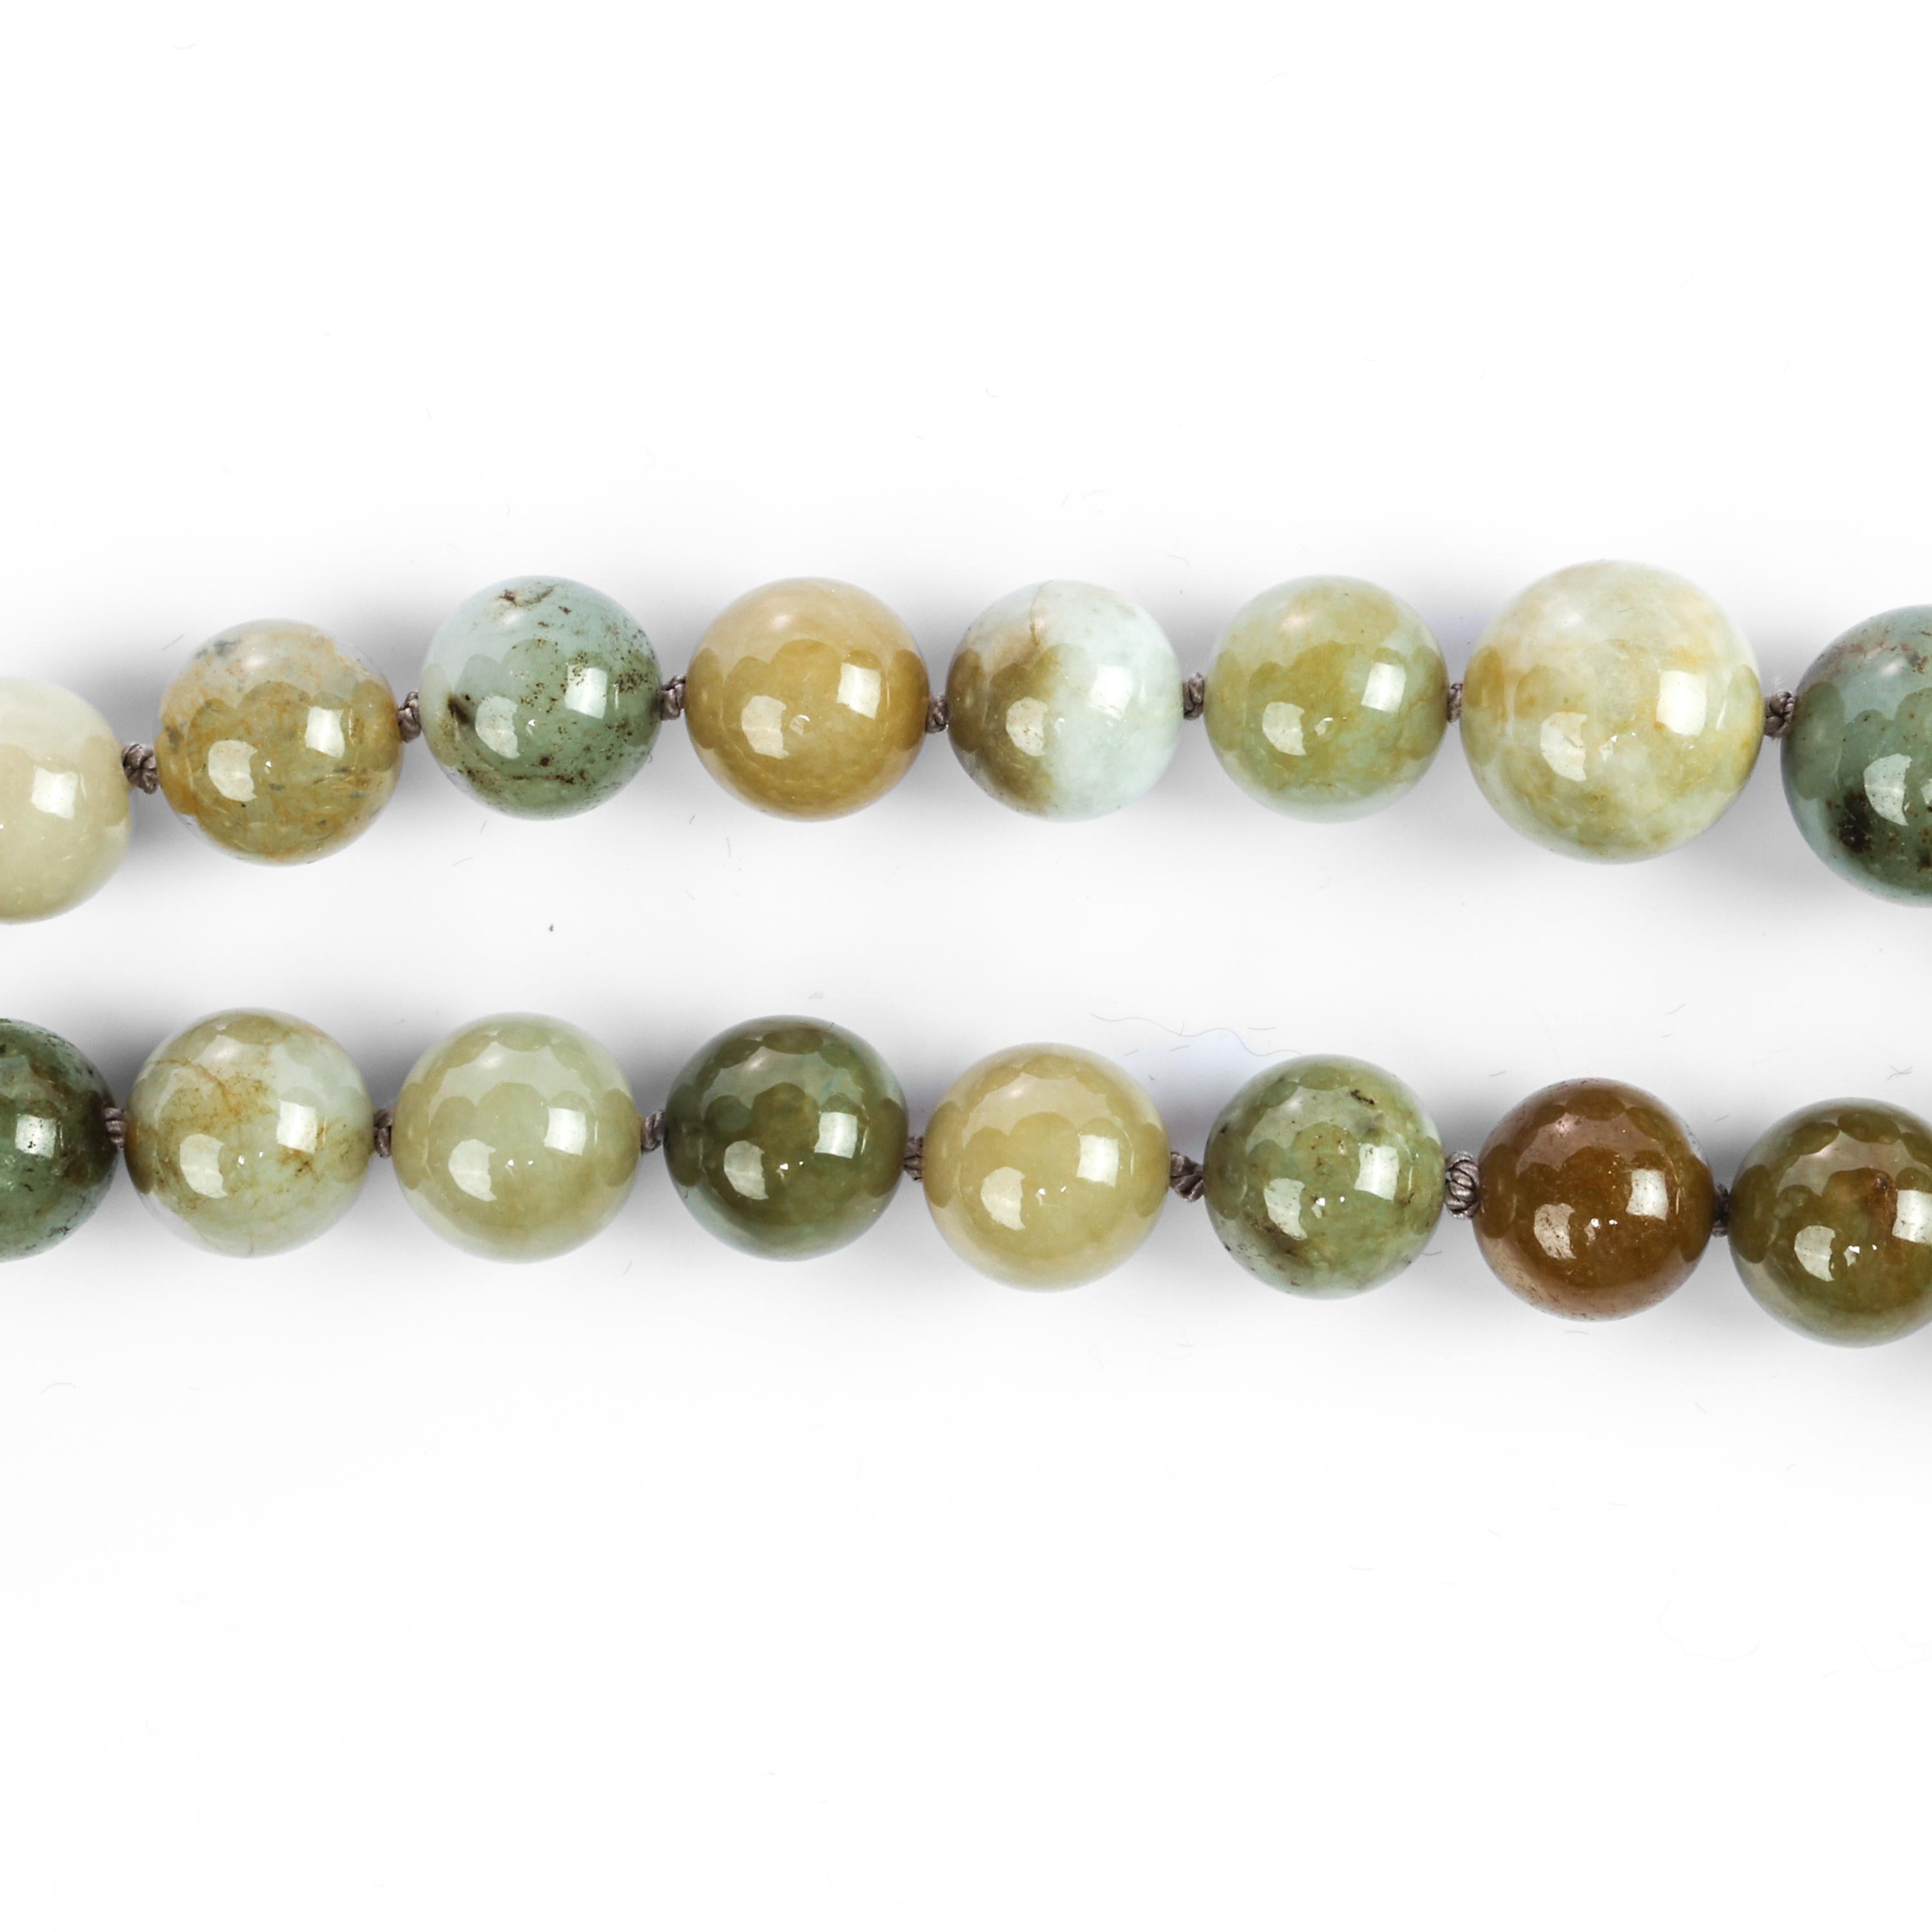 Bead Jade Necklace Late Autumn Coloring Certified Untreated